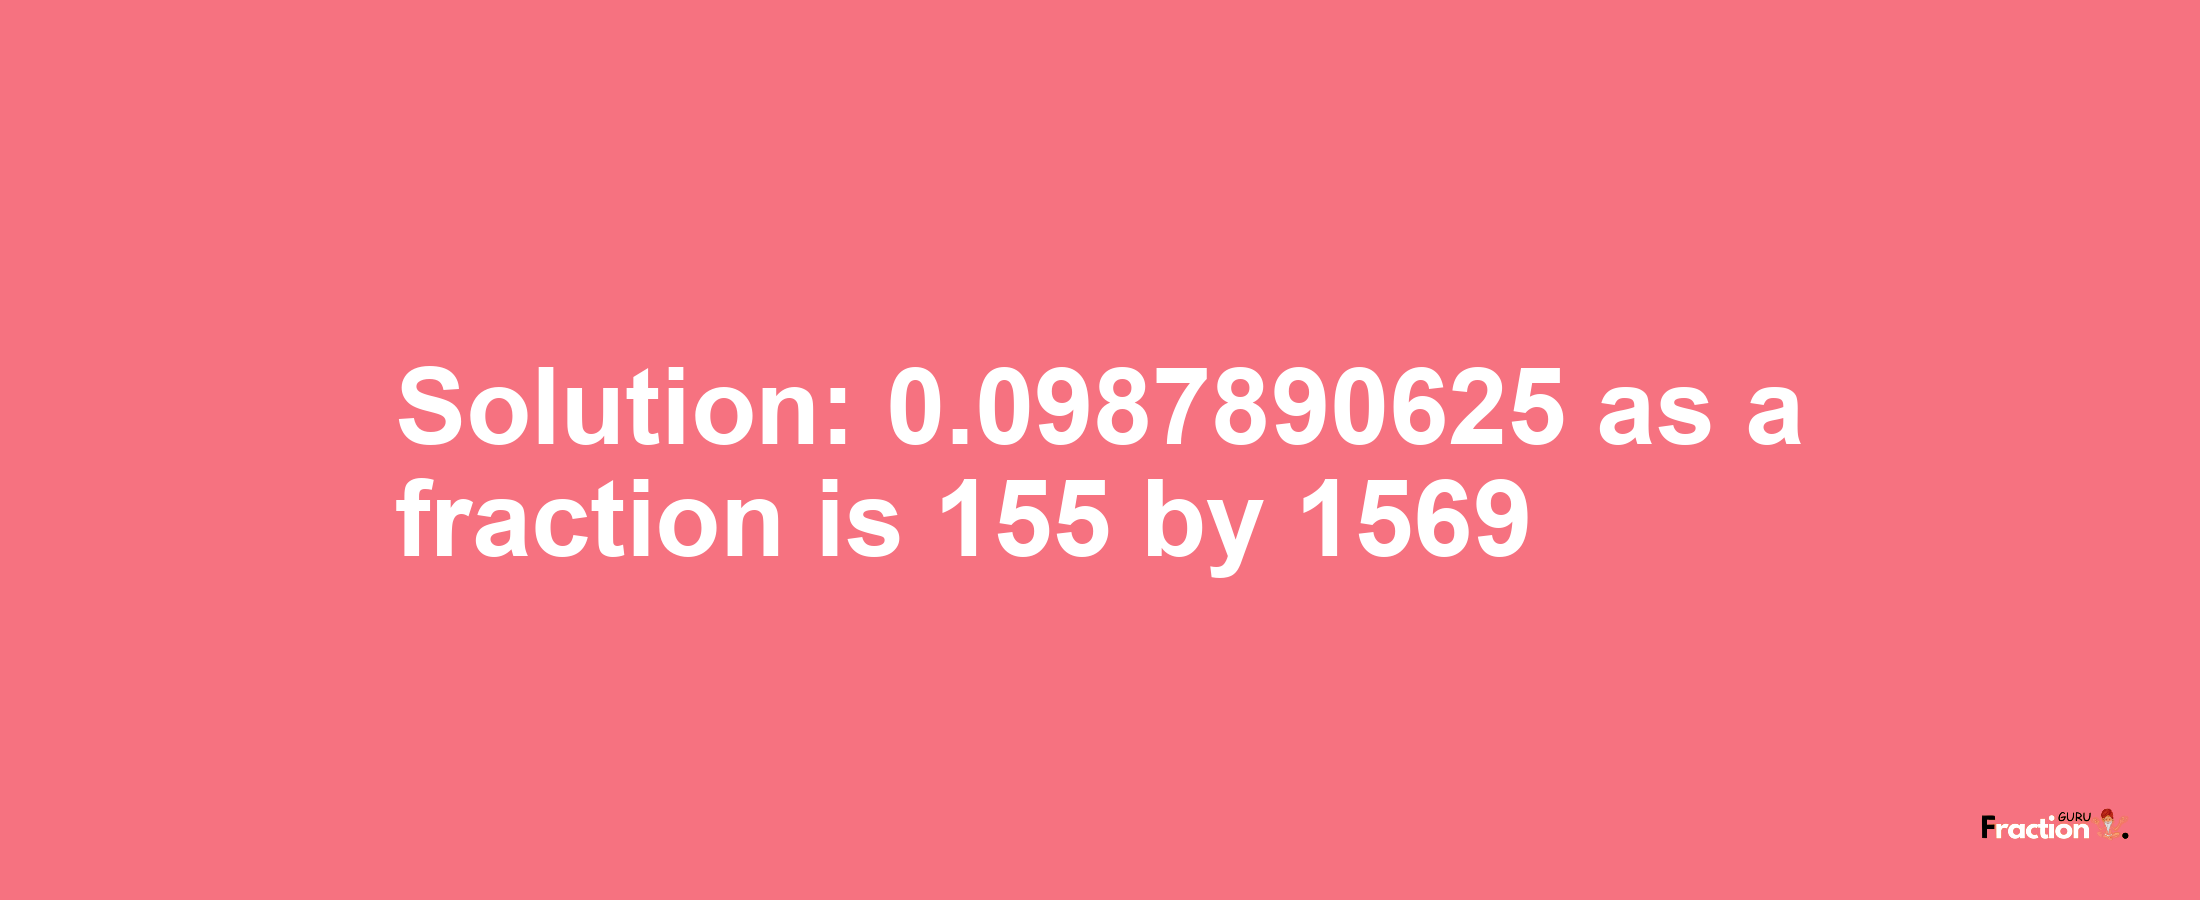 Solution:0.0987890625 as a fraction is 155/1569